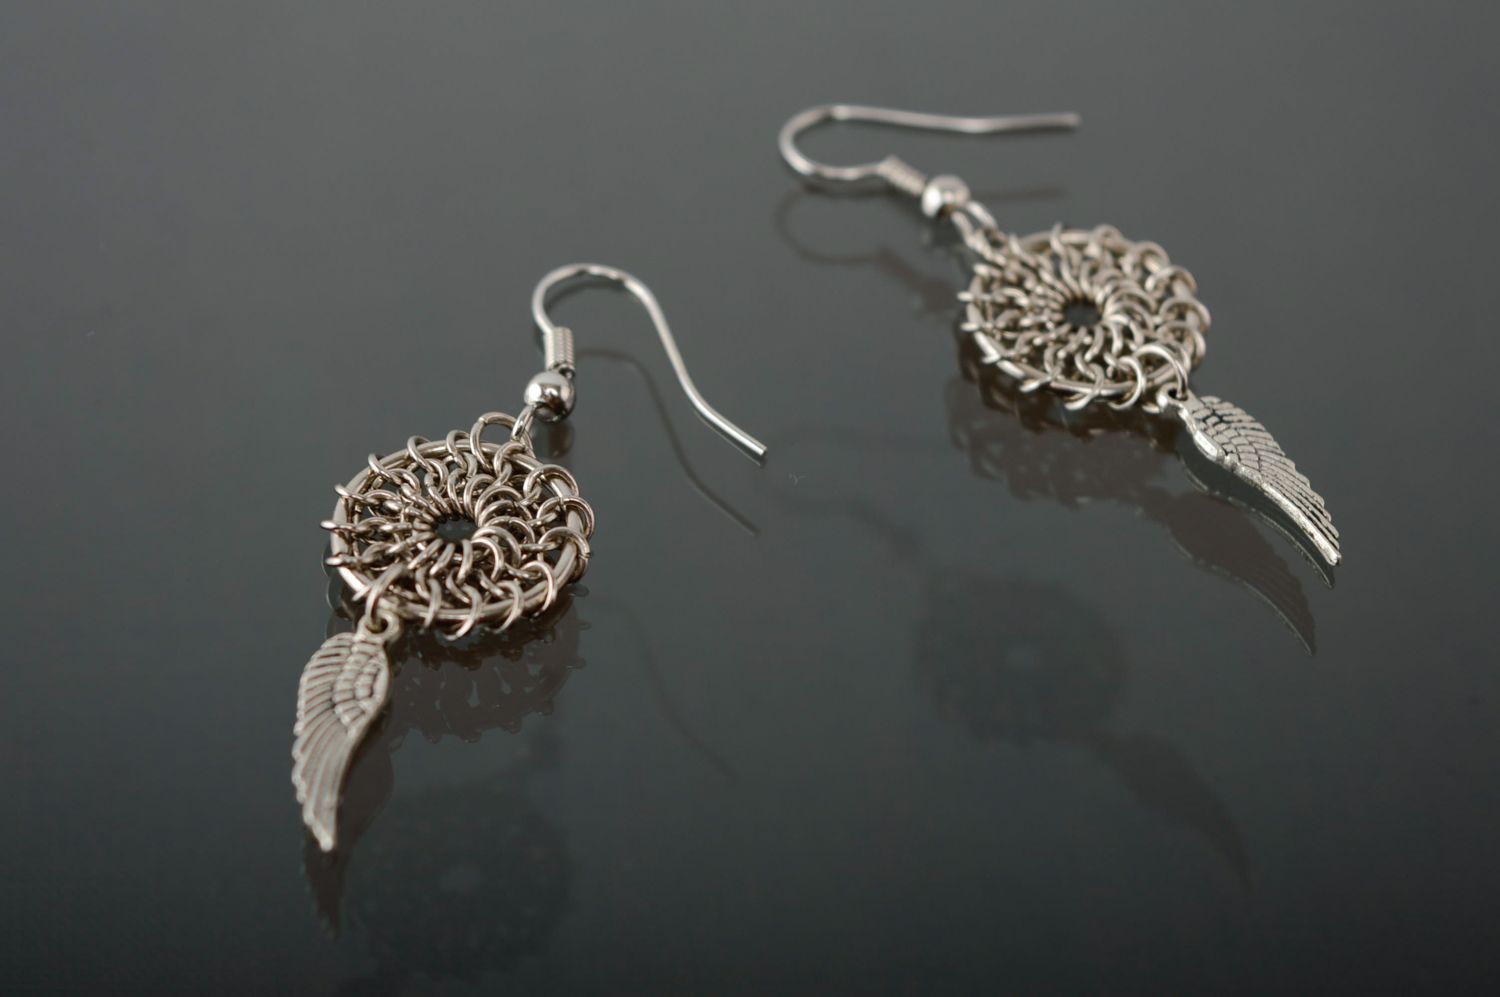 Handmade metal chainmaille earrings with pendant wings photo 1